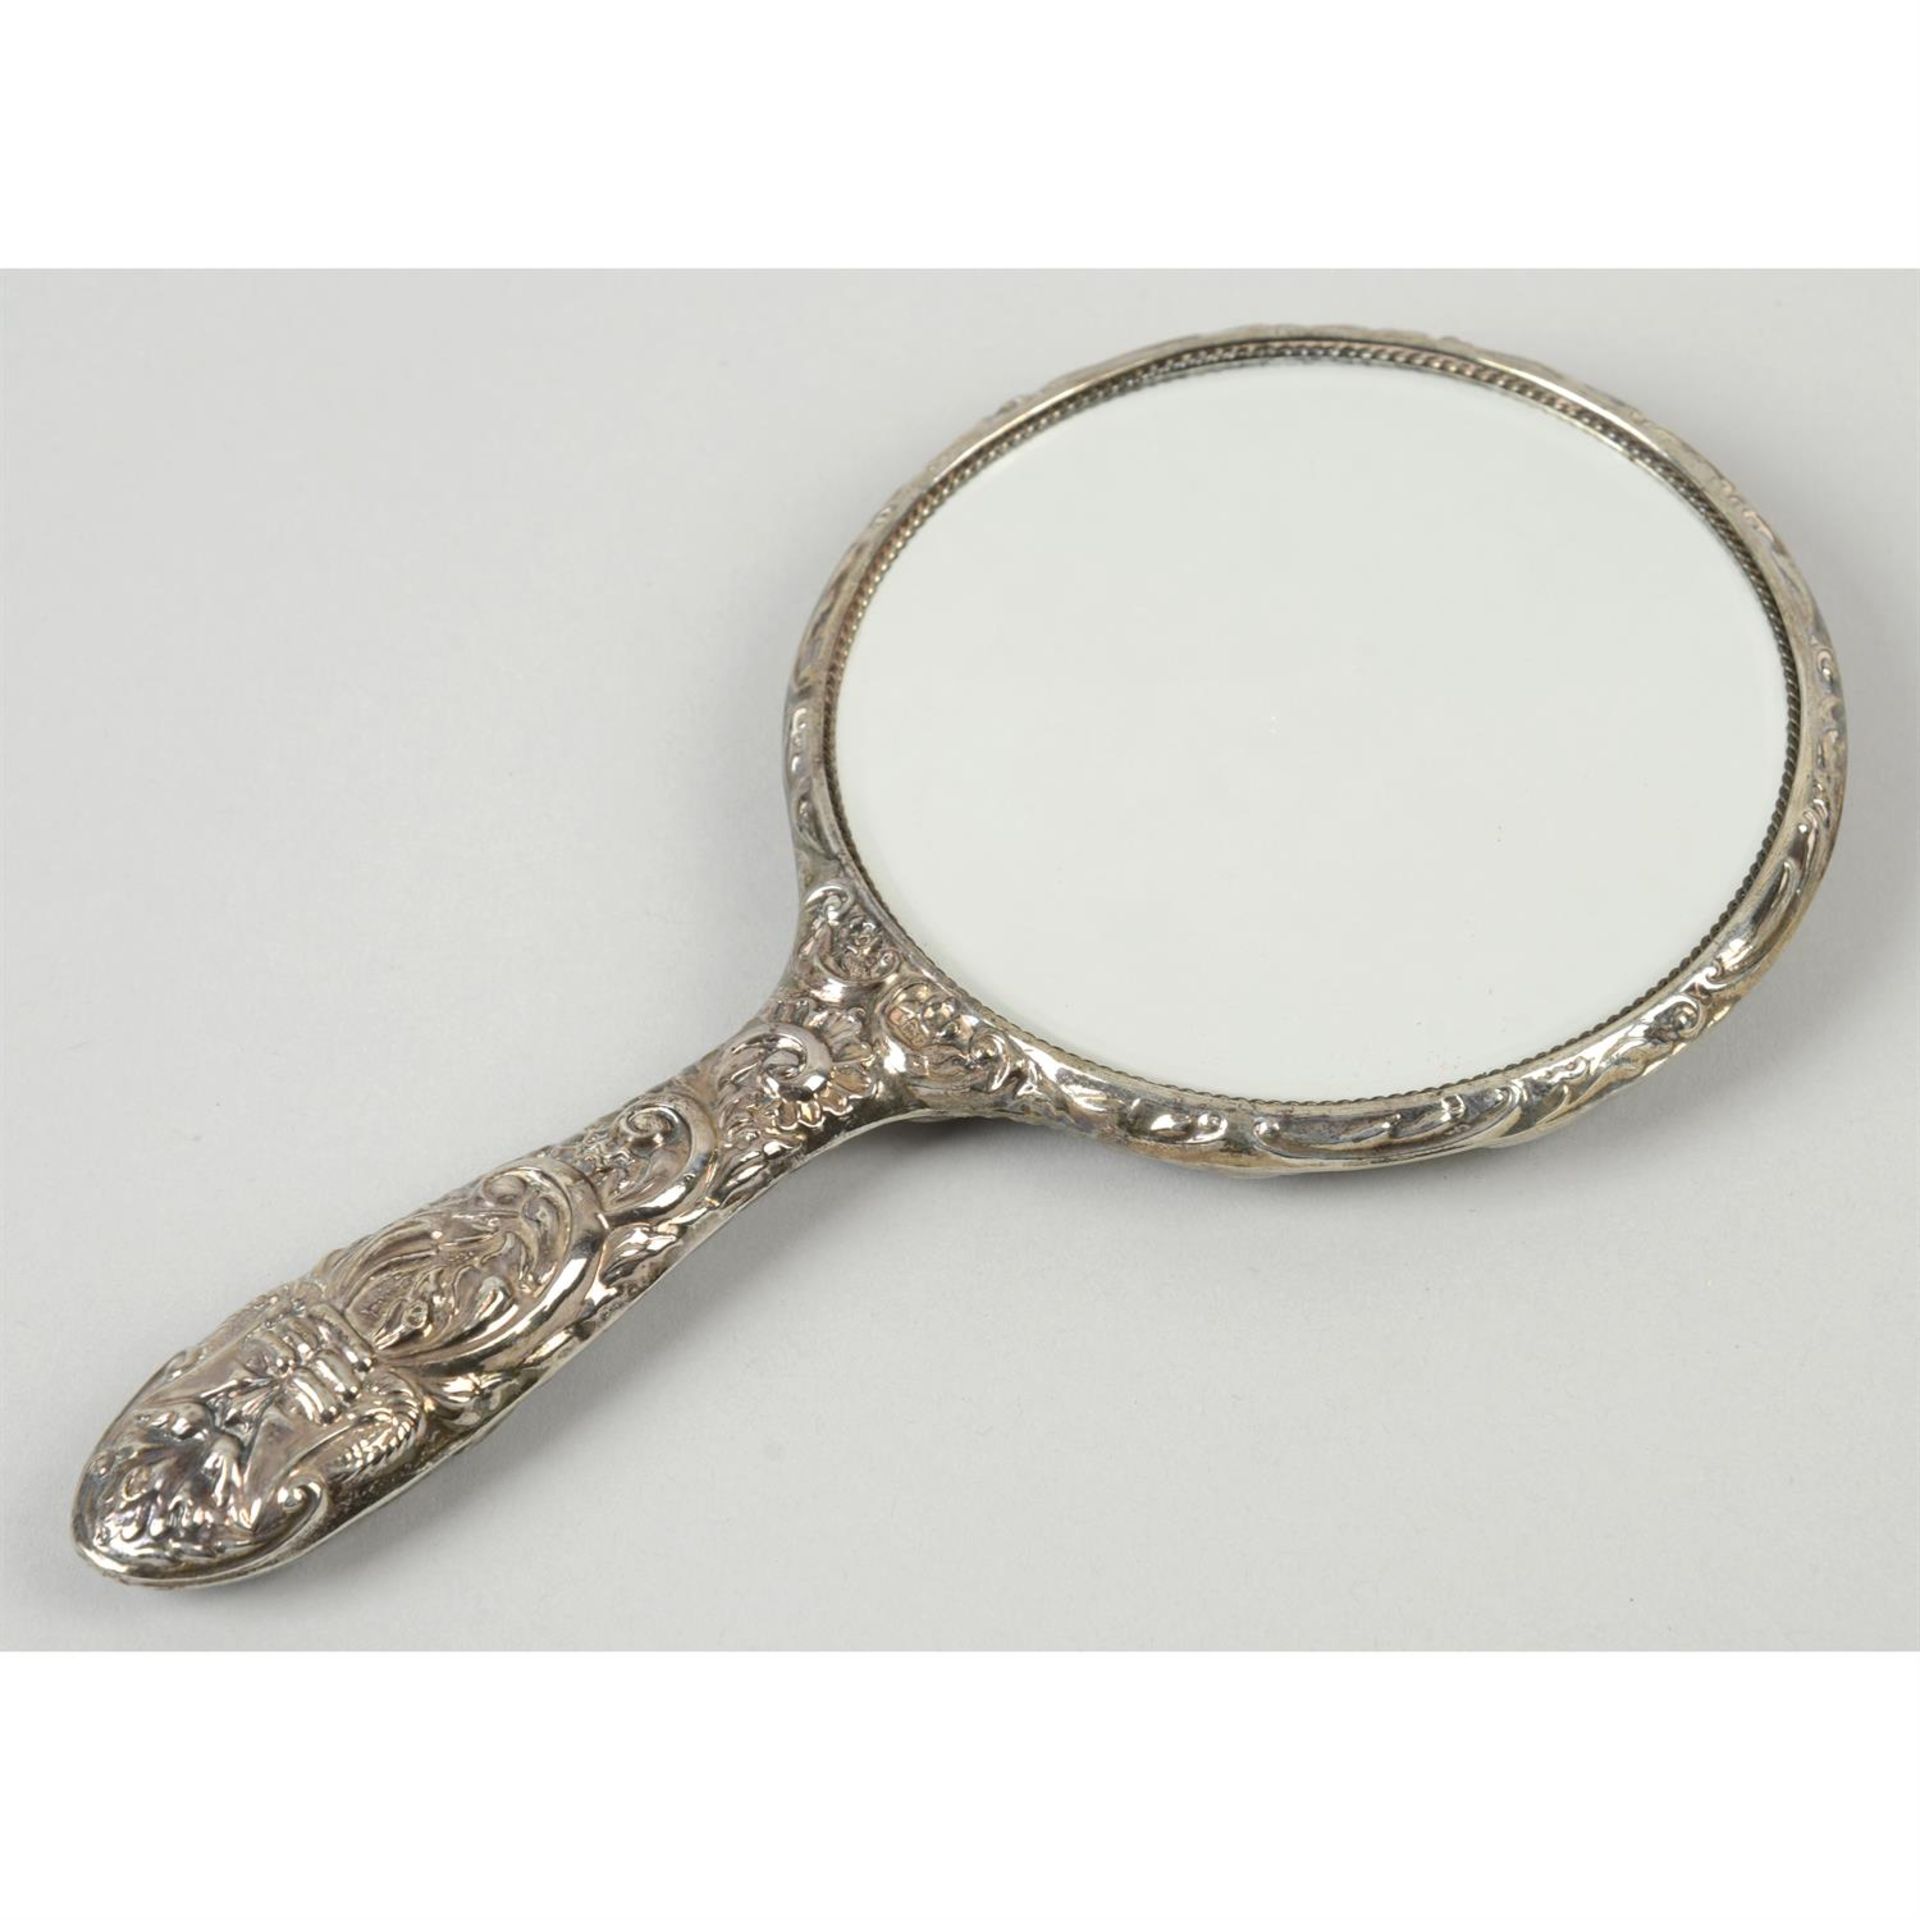 An embossed silver-handled hand-held mirror. - Image 2 of 3